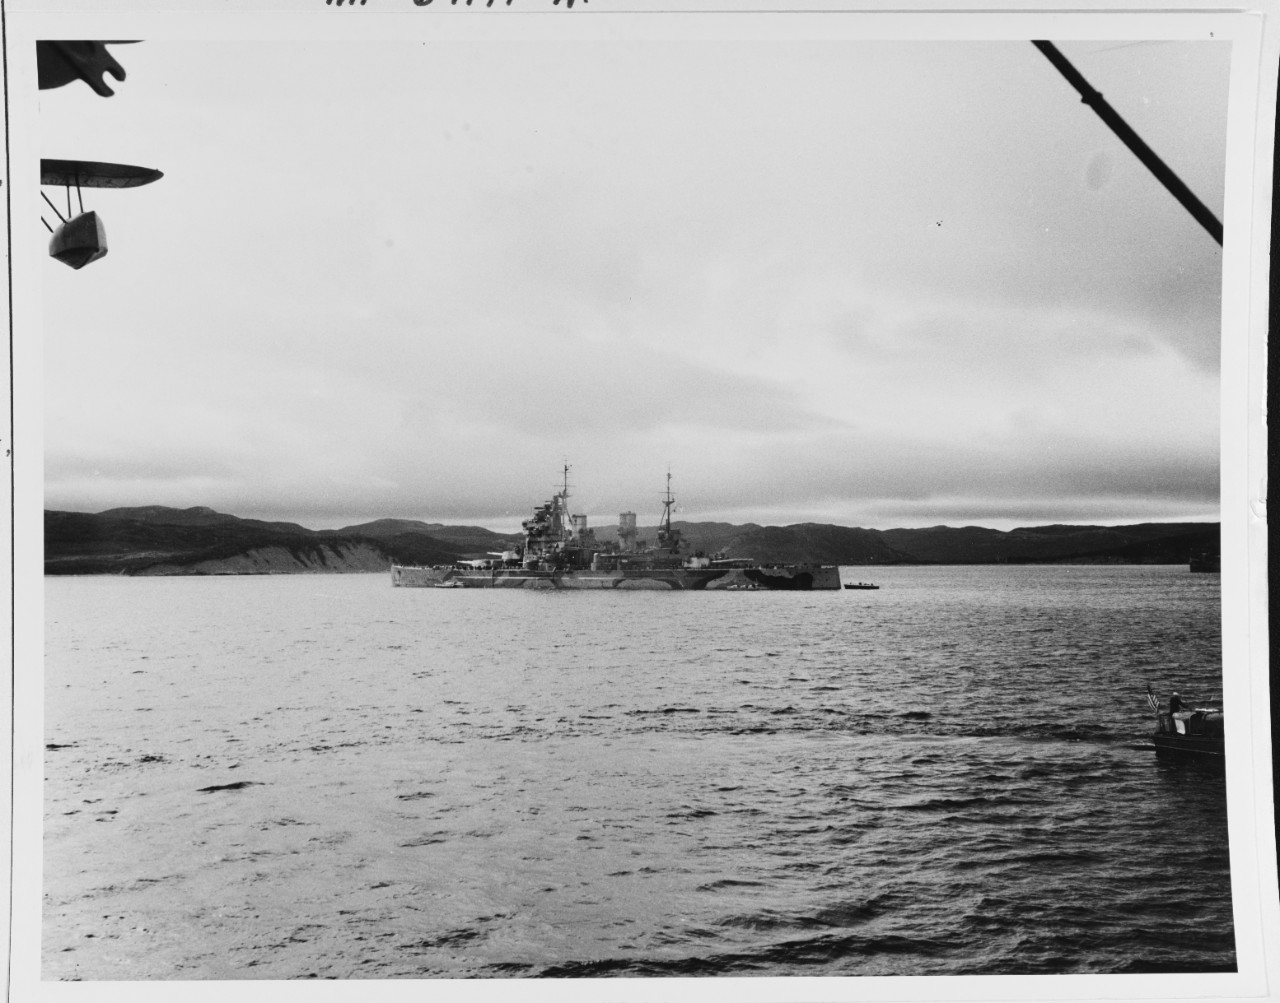 Photo #: NH 67194-A  Atlantic Charter Conference, 10-12 August 1941